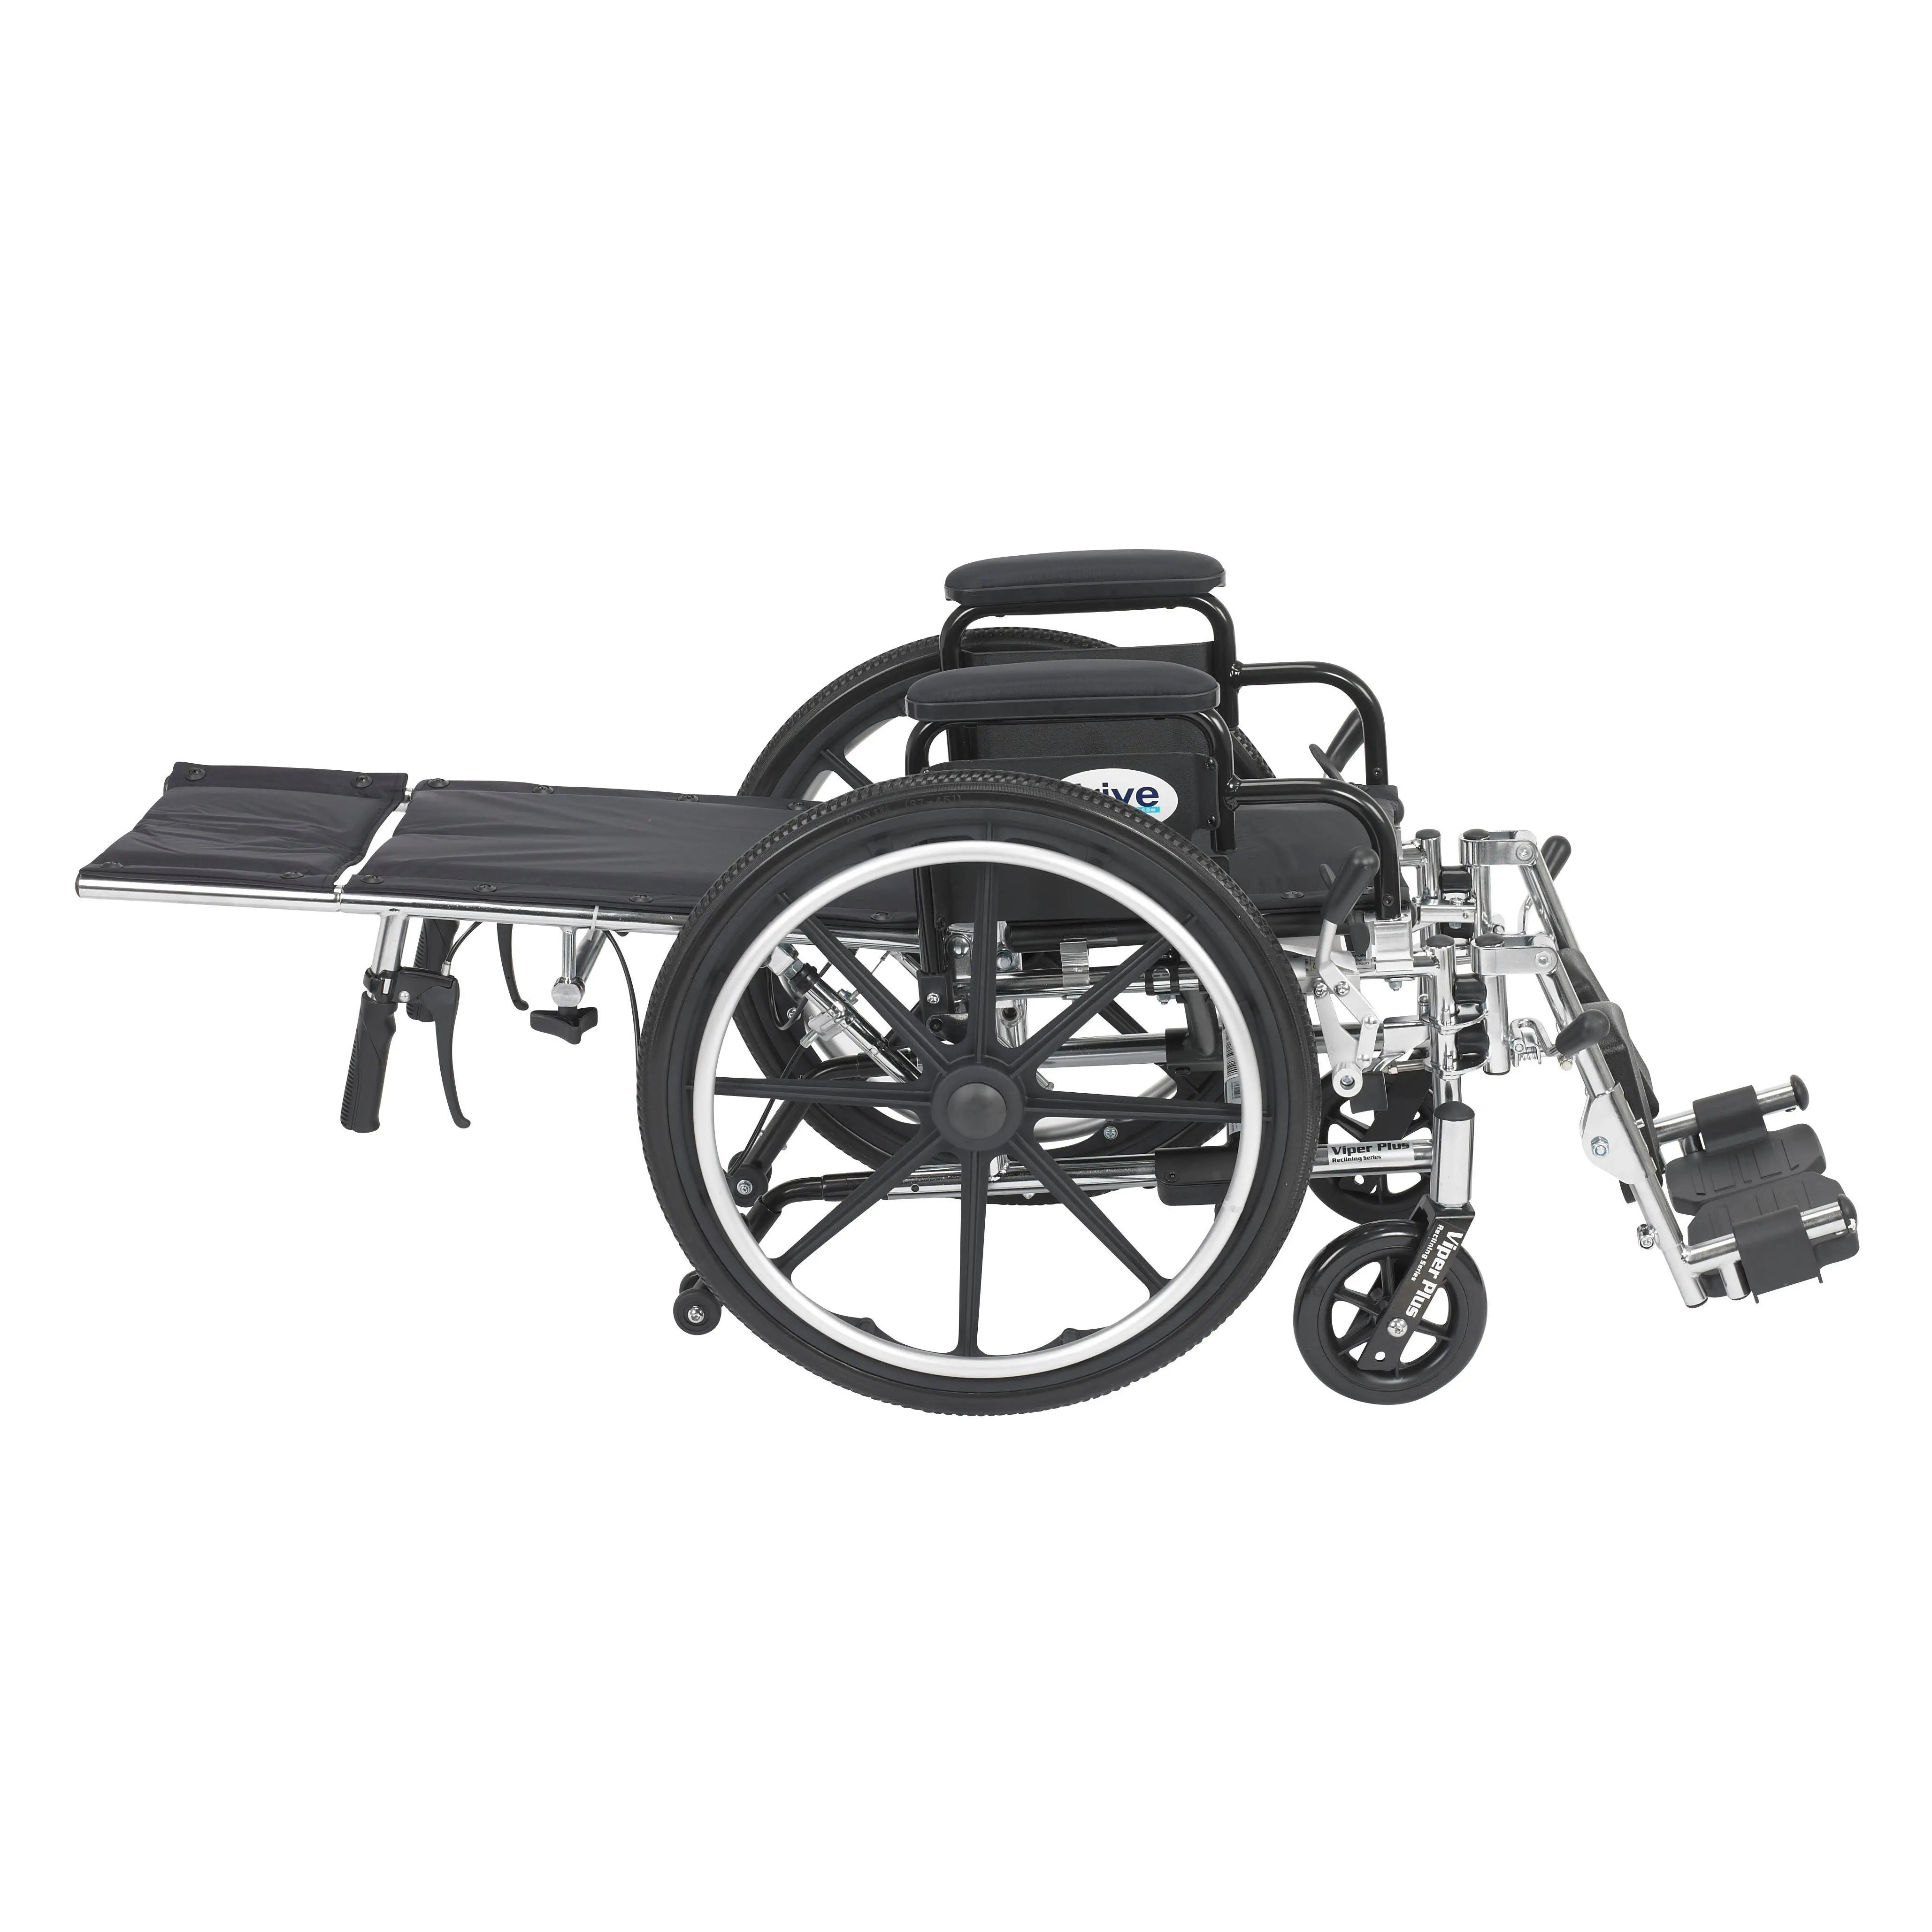 Viper Plus Light Weight Reclining Wheelchair with Elevating Leg rest and Flip Back Detachable Arms - Home Health Store Inc